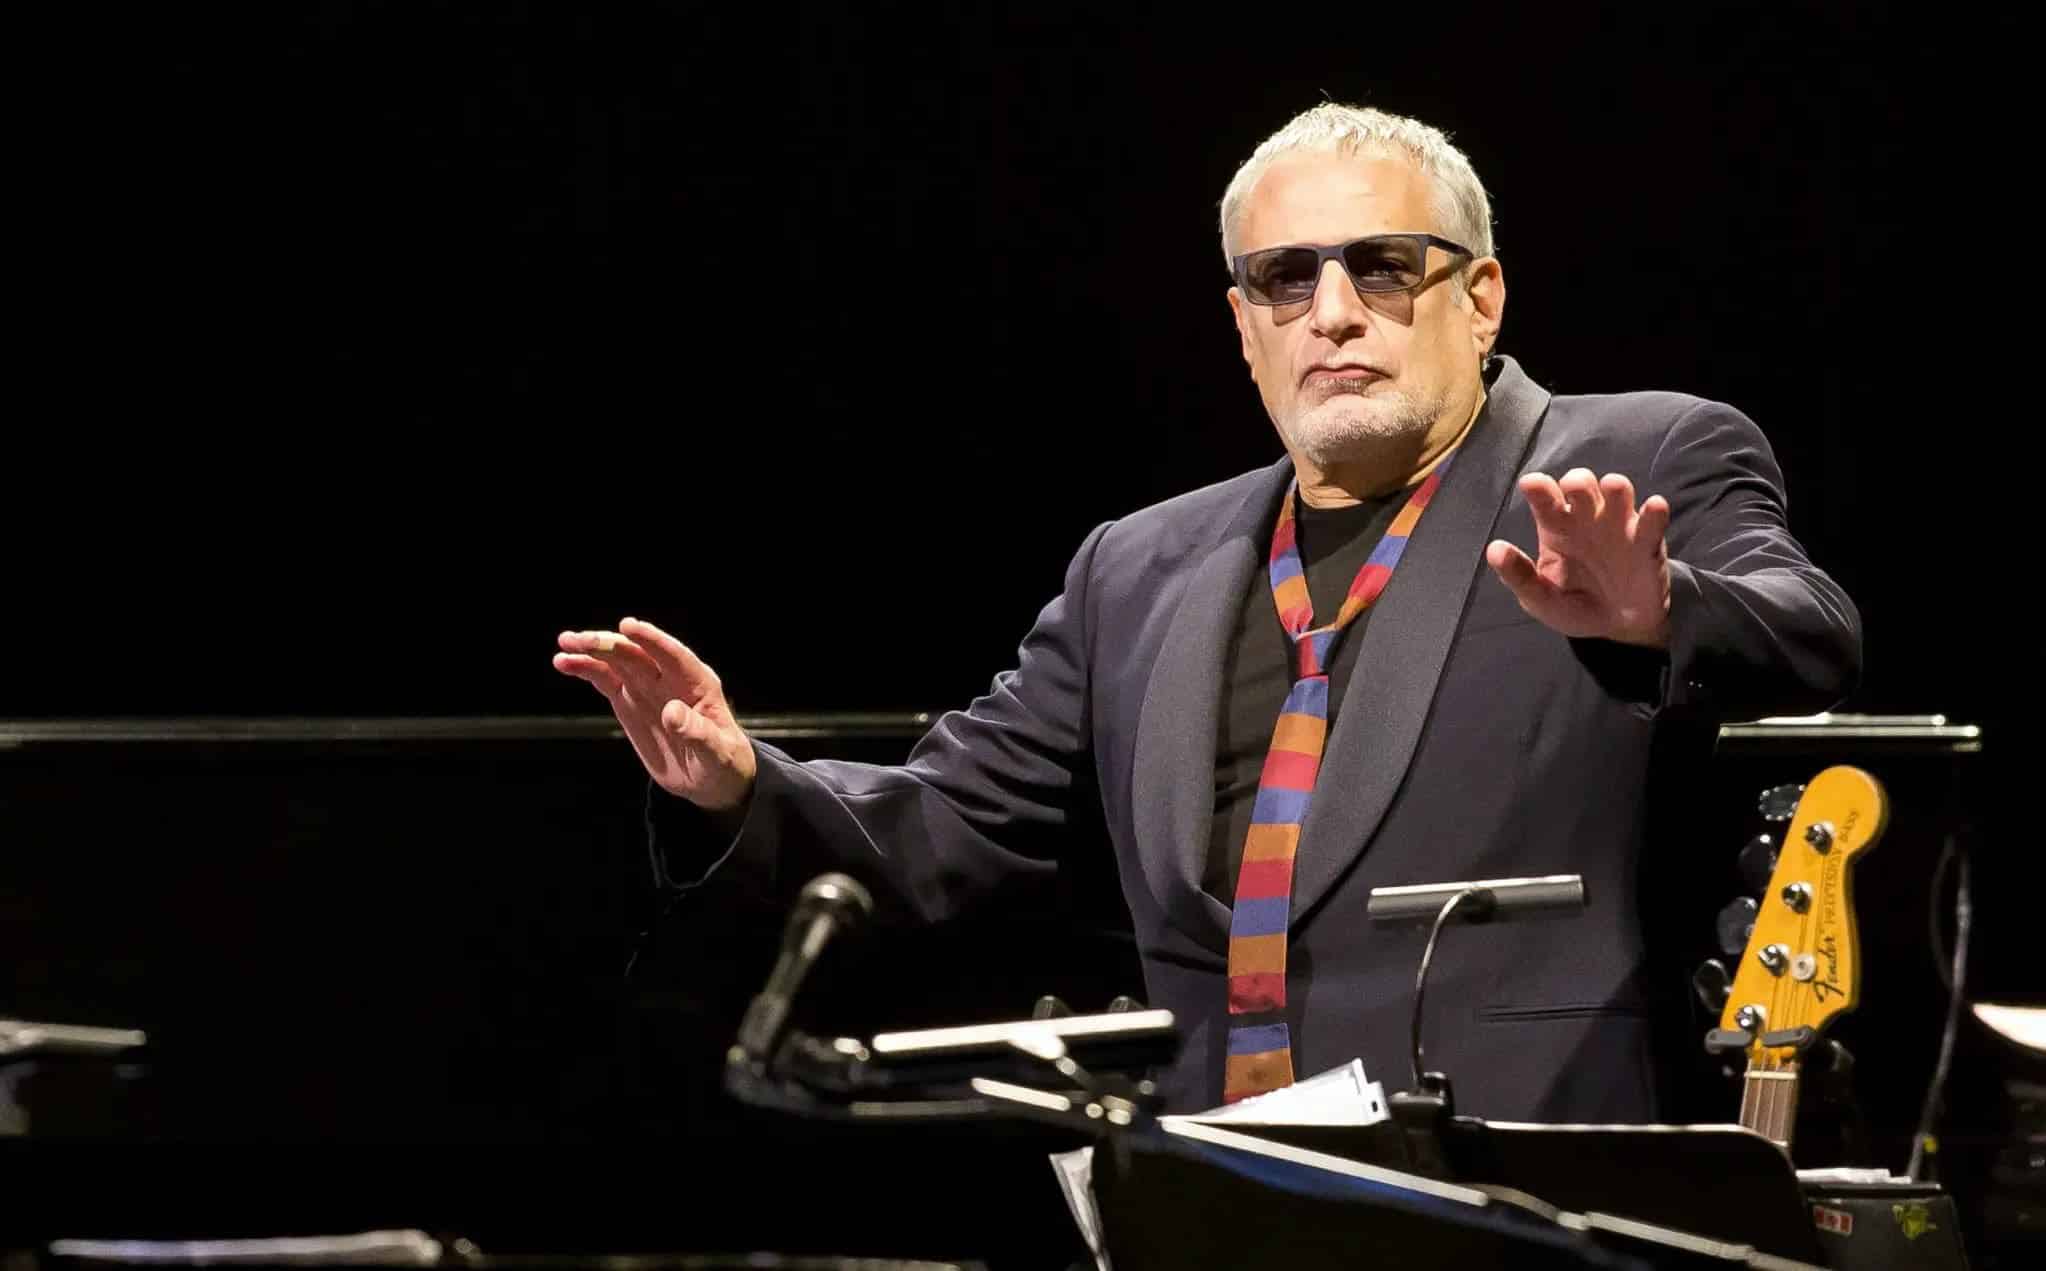 10 Best Donald Fagen Songs of All Time